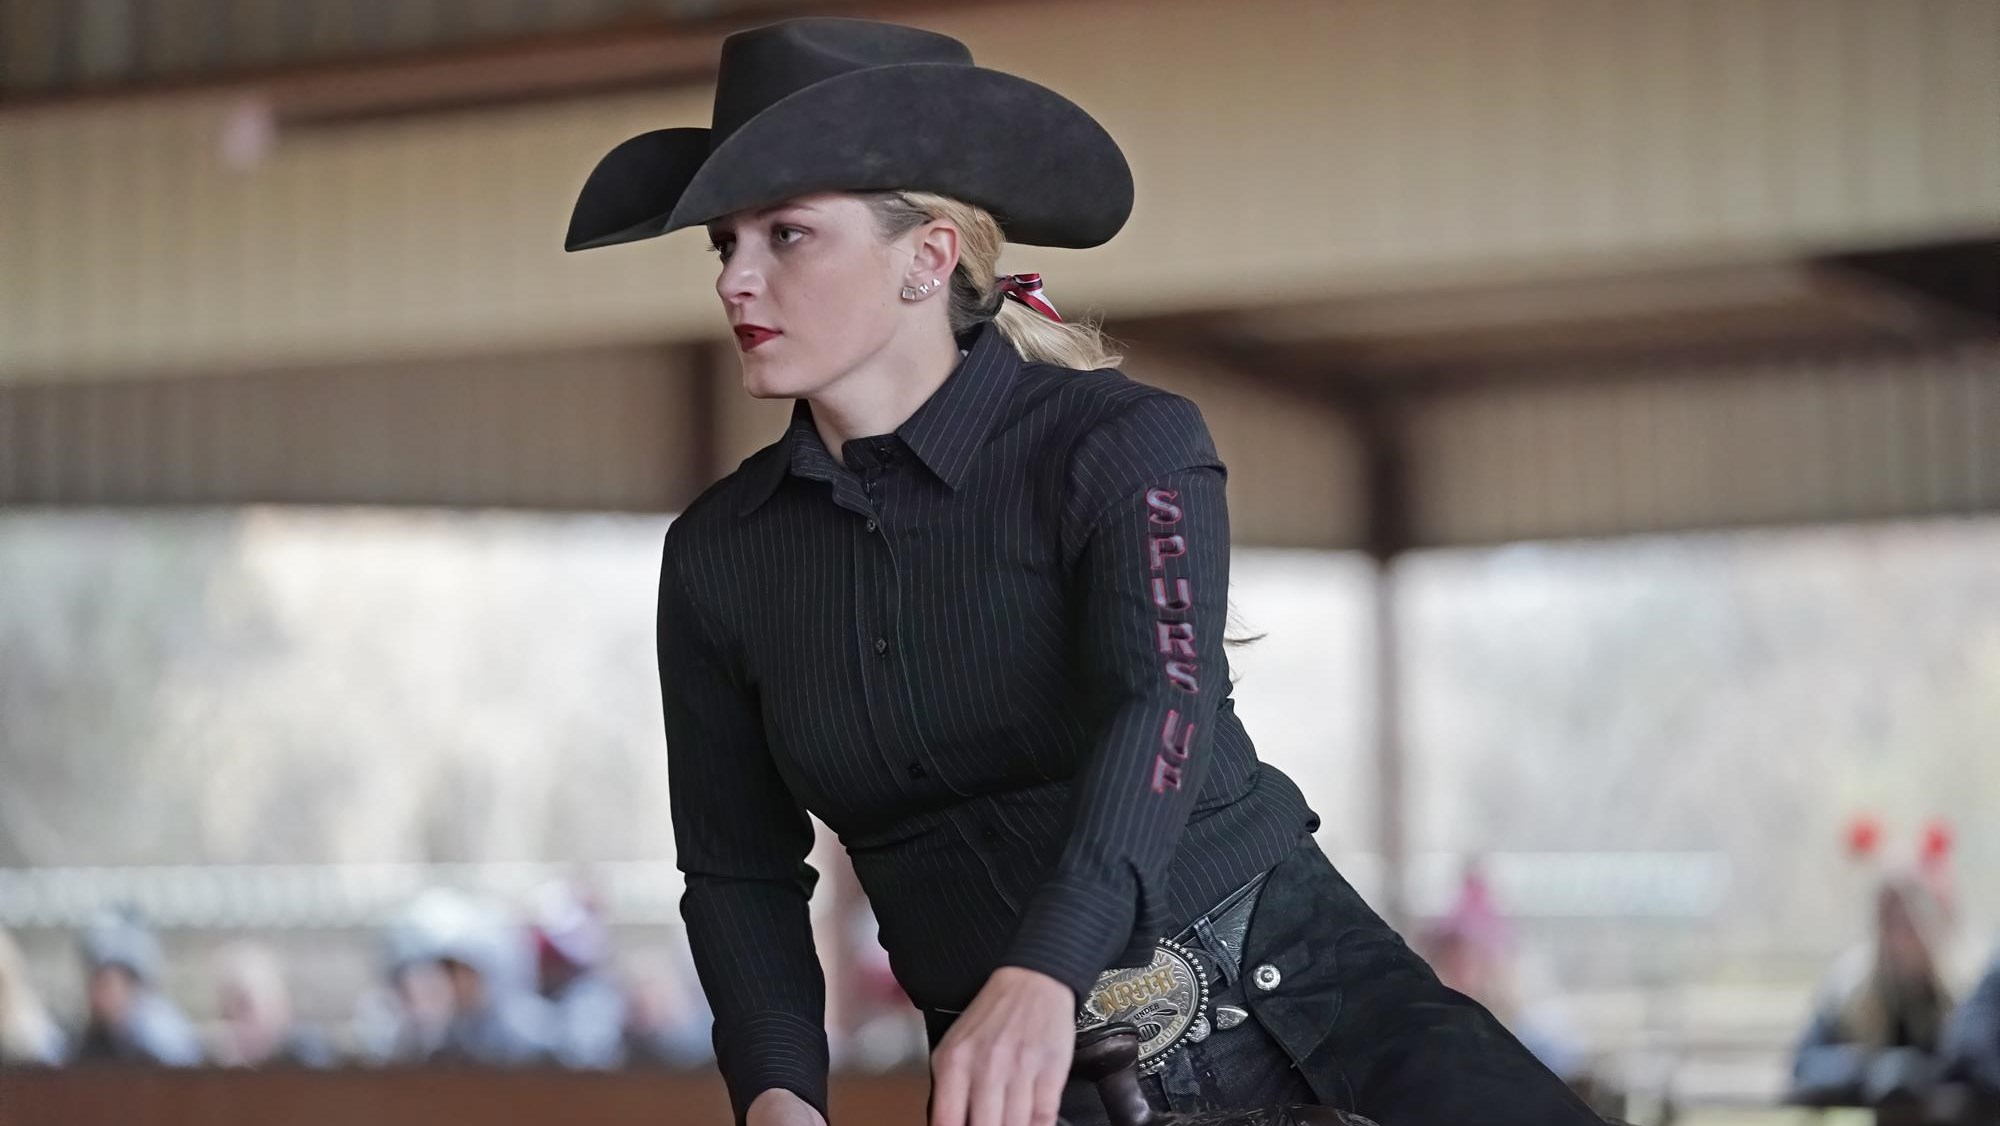 Caroline Gute Named NCEA Reining Rider of the Year